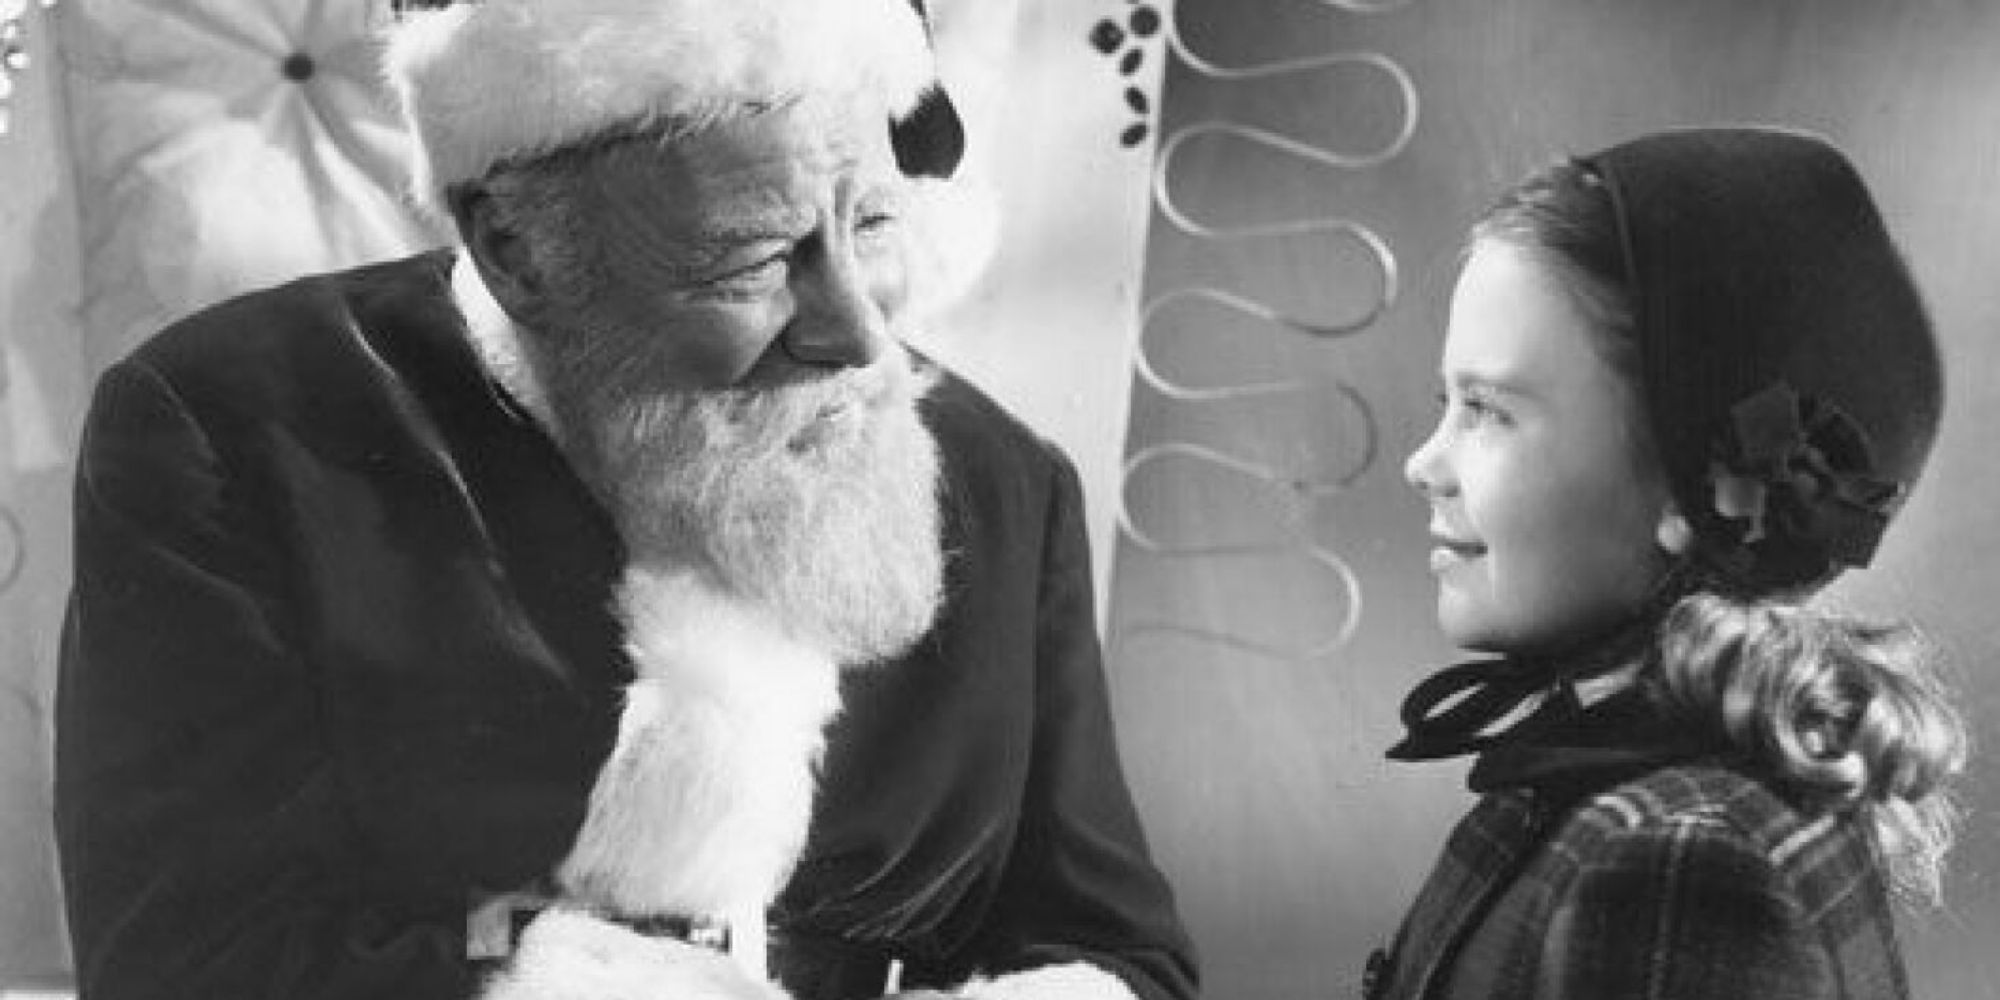 Santa Clause talking to a young girl in Miracle on 34th Street